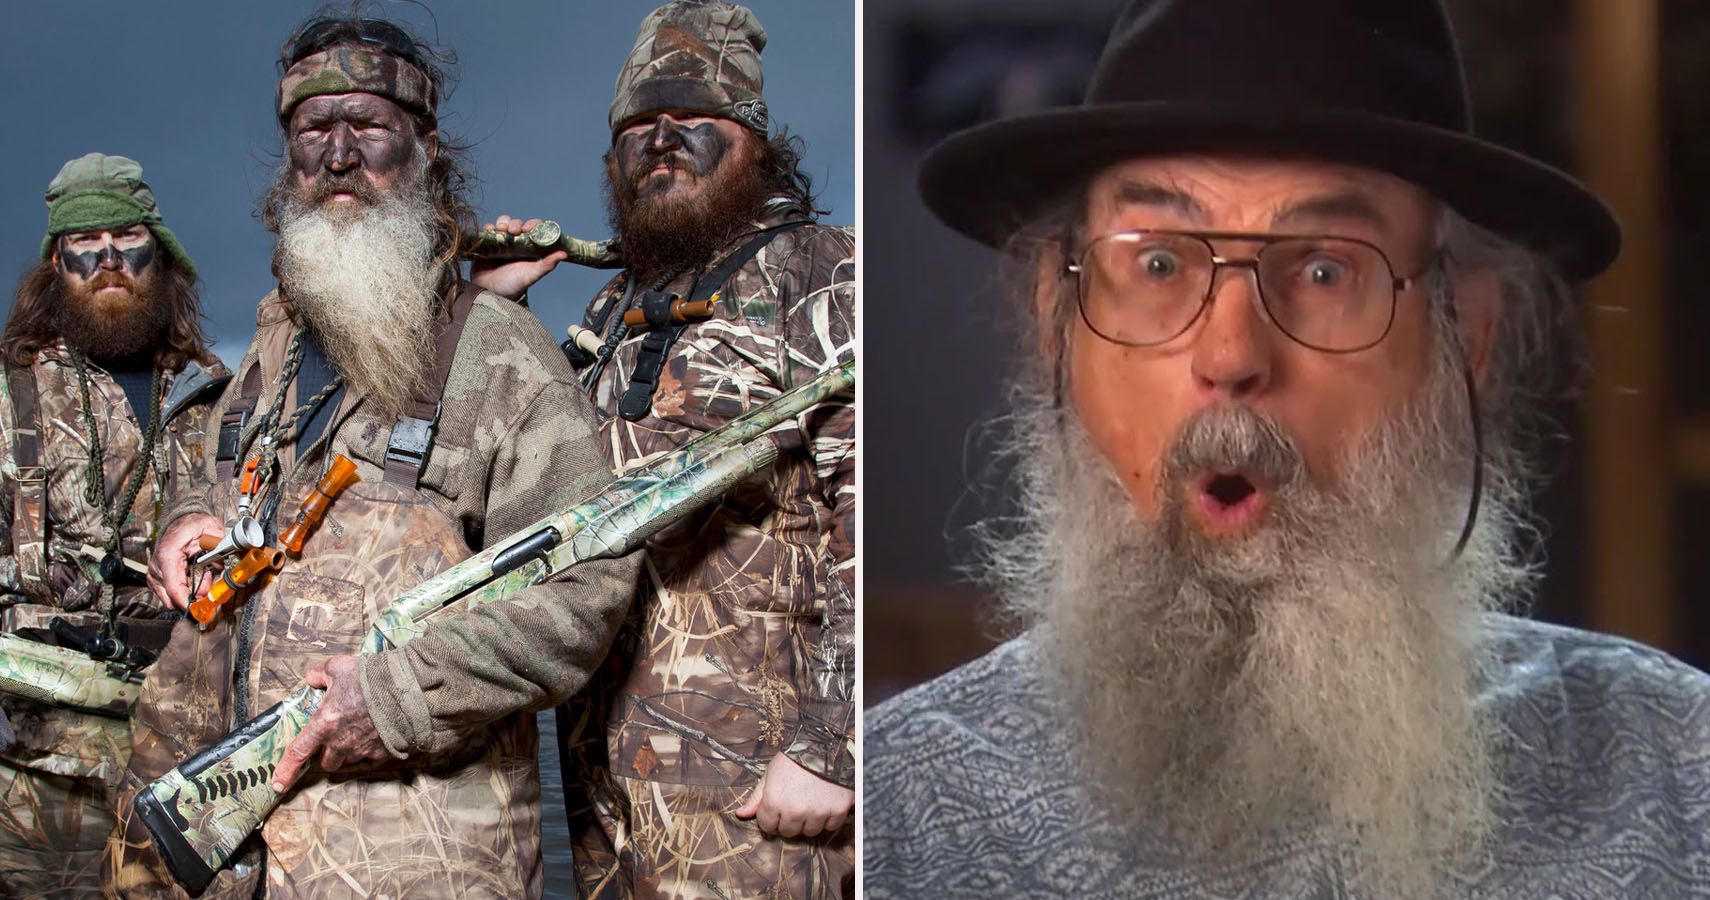 Duck Dynasty 15 Things We Didn't Know About The Robertsons And The Show